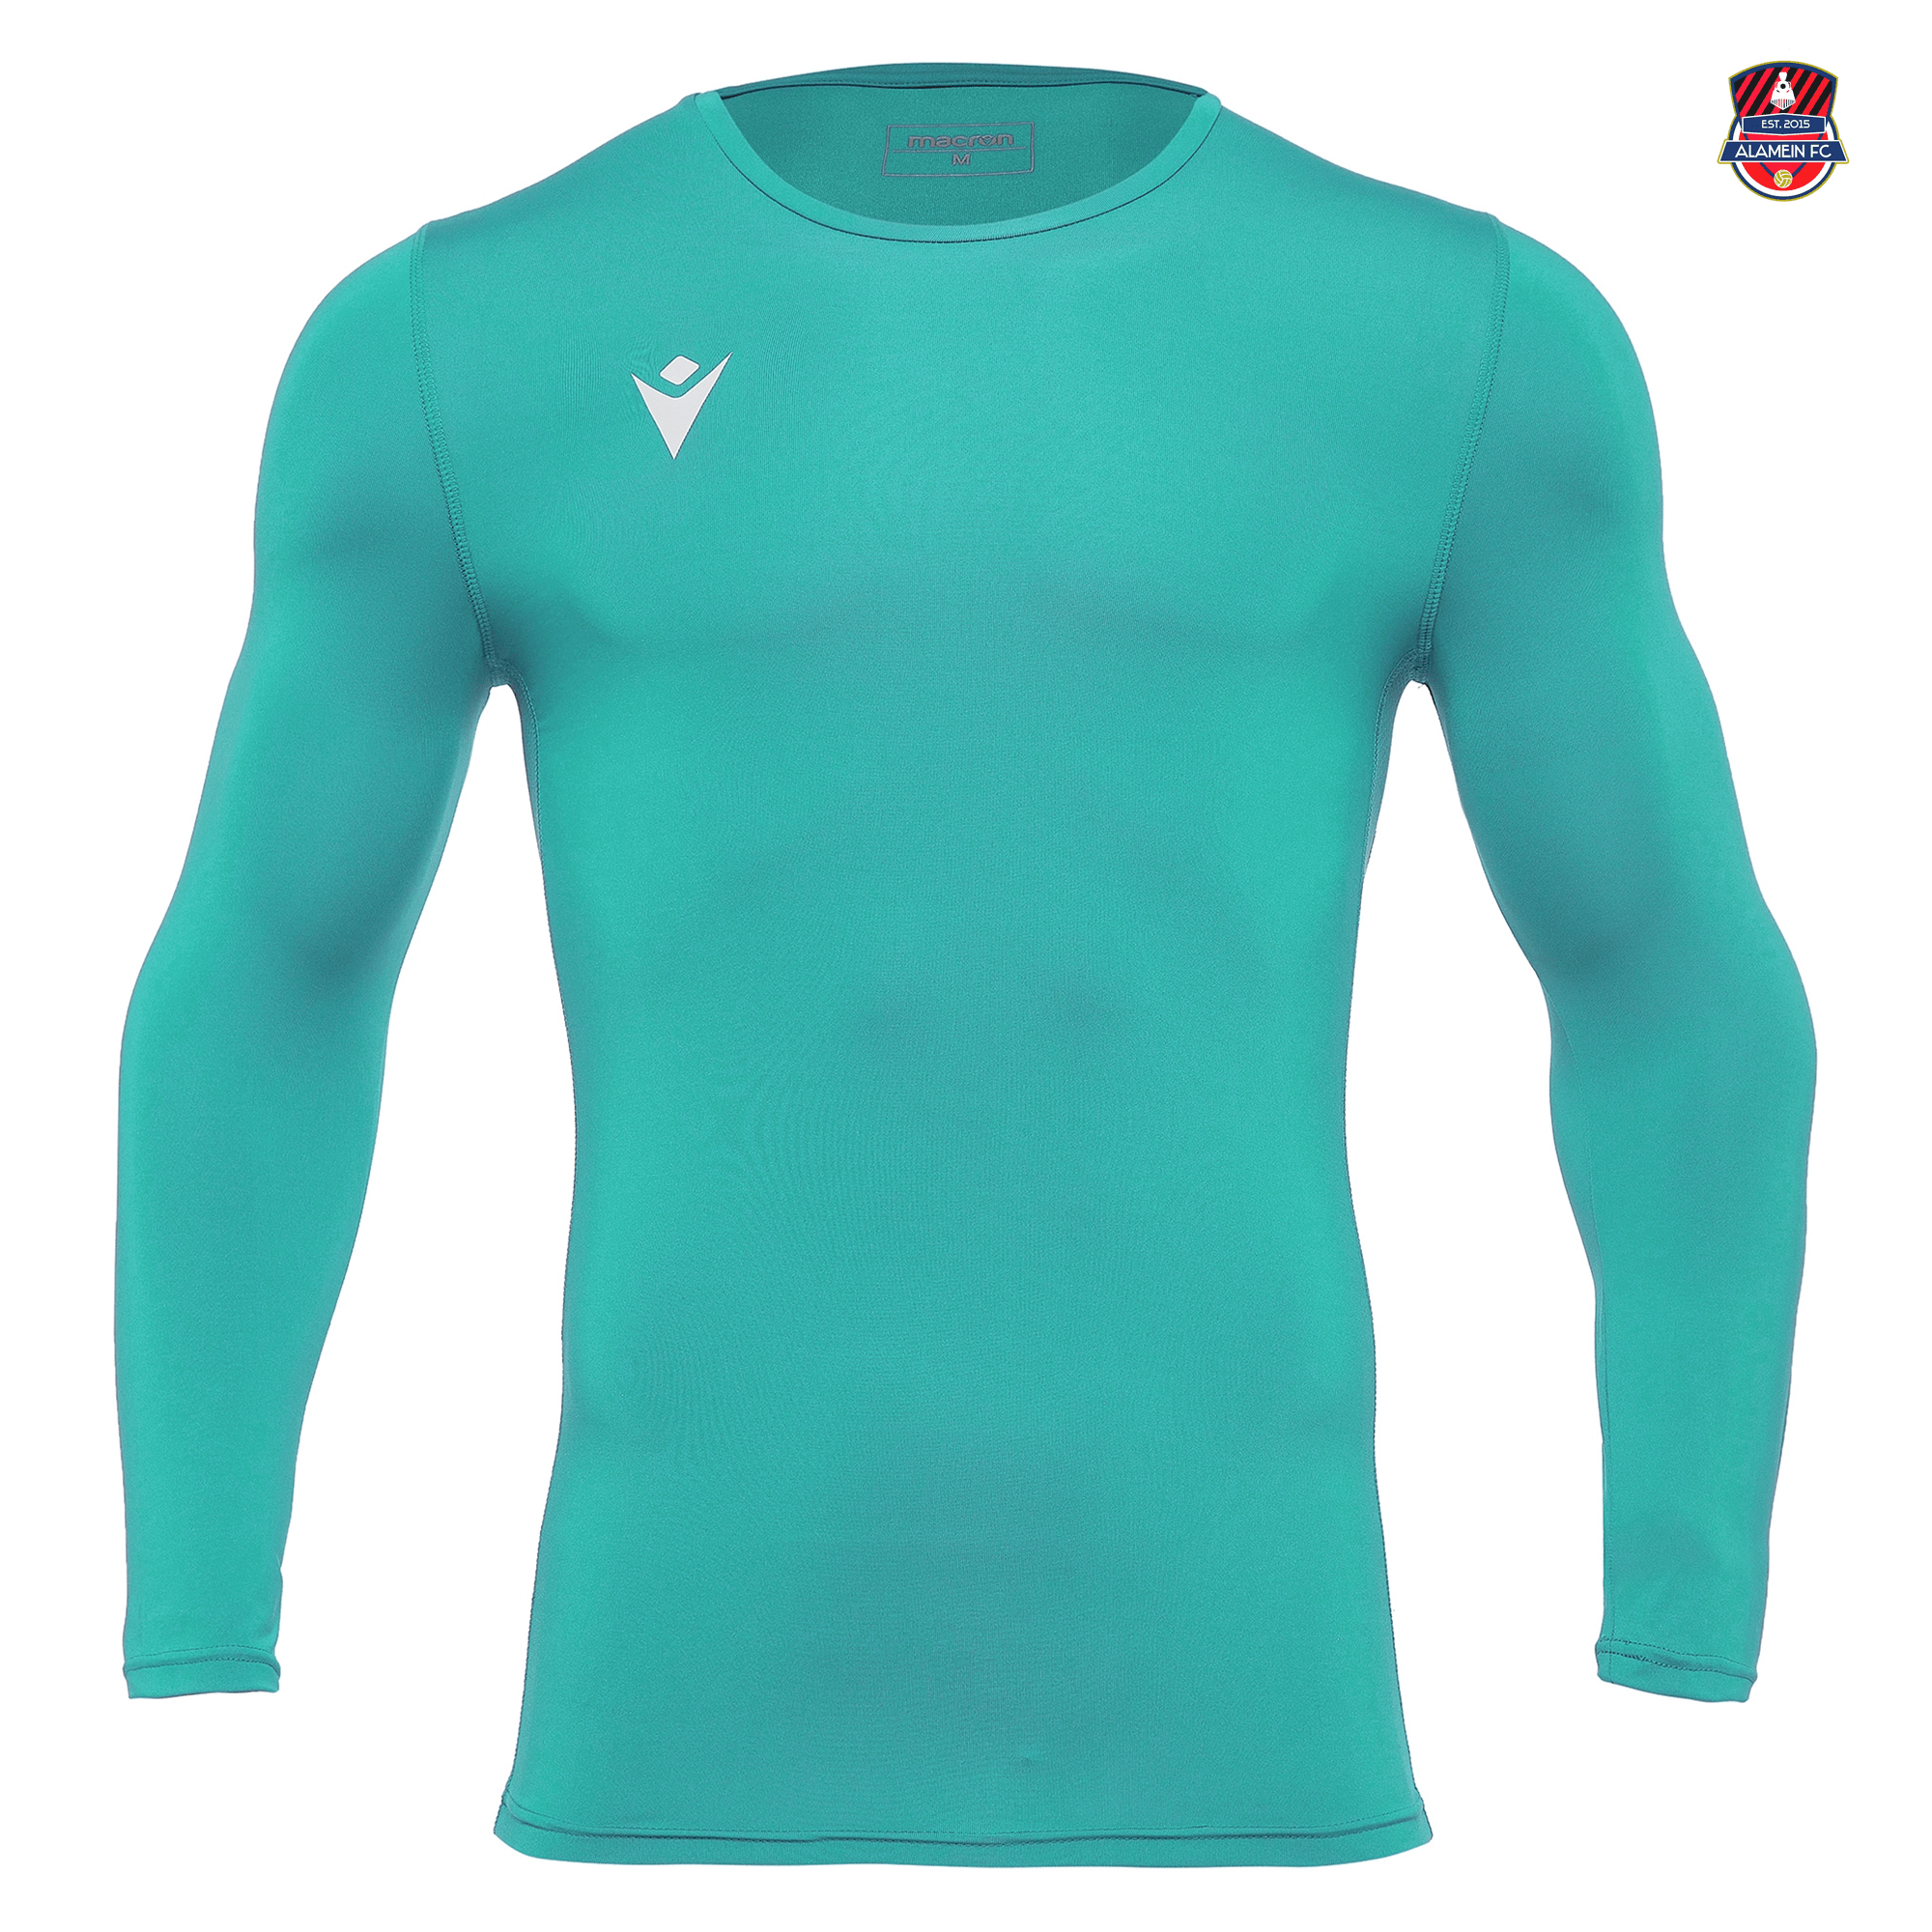 ALAMEIN FC HOLLY UNDERSHIRT TURQUOISE